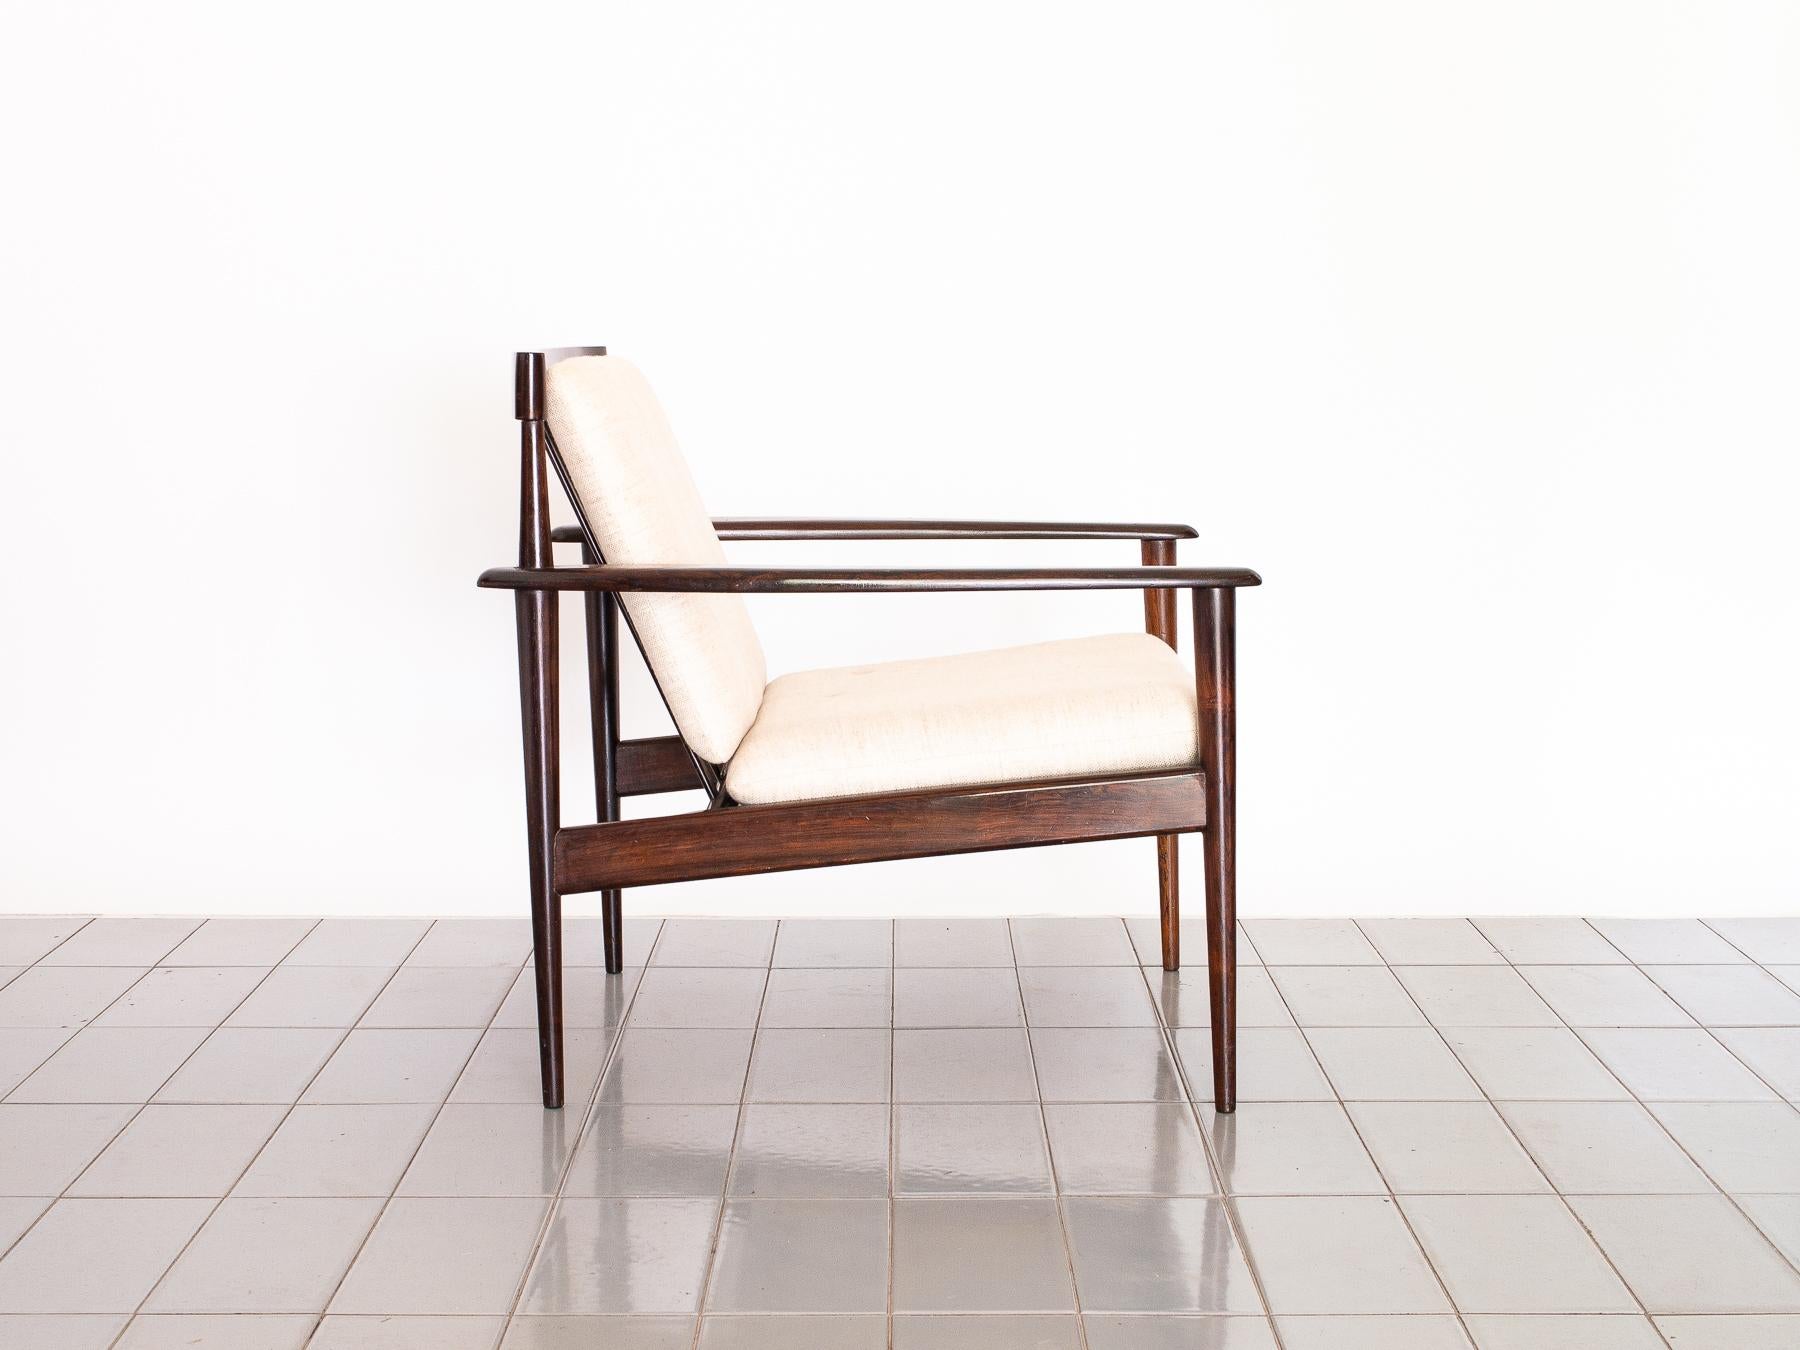 Mid-Century Modern 1950s Lounge Chair in Rosewood, Grete Jalk Design, Brazilian Production